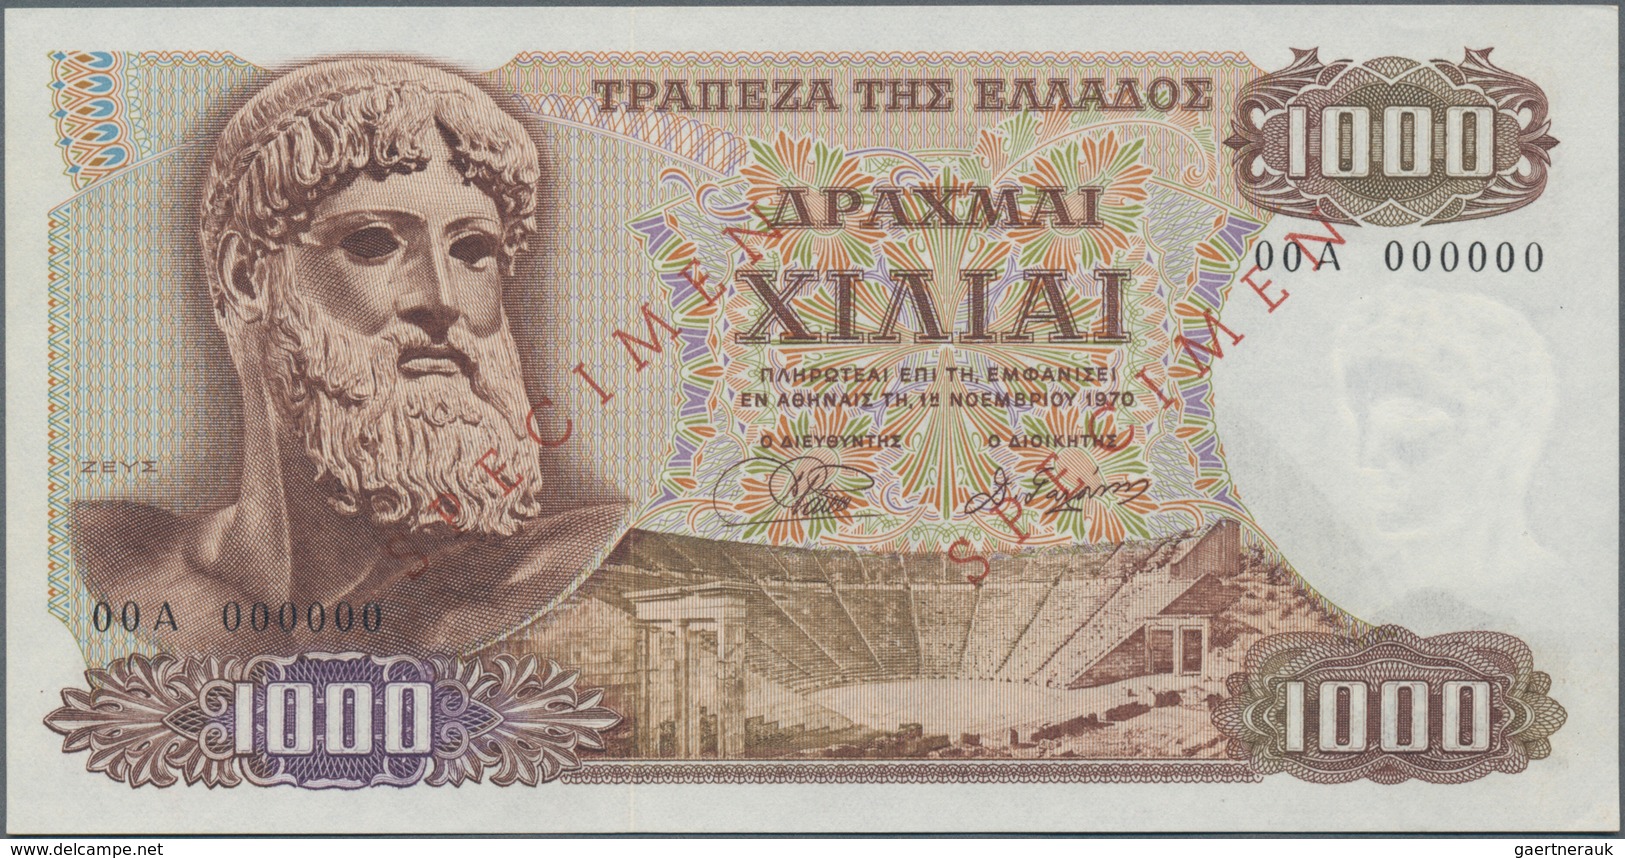 Greece / Griechenland: 1000 Drachmai 1970 SPECIMEN, P.198bs, Serial Number 00A 000000 And Red Overpr - Griechenland